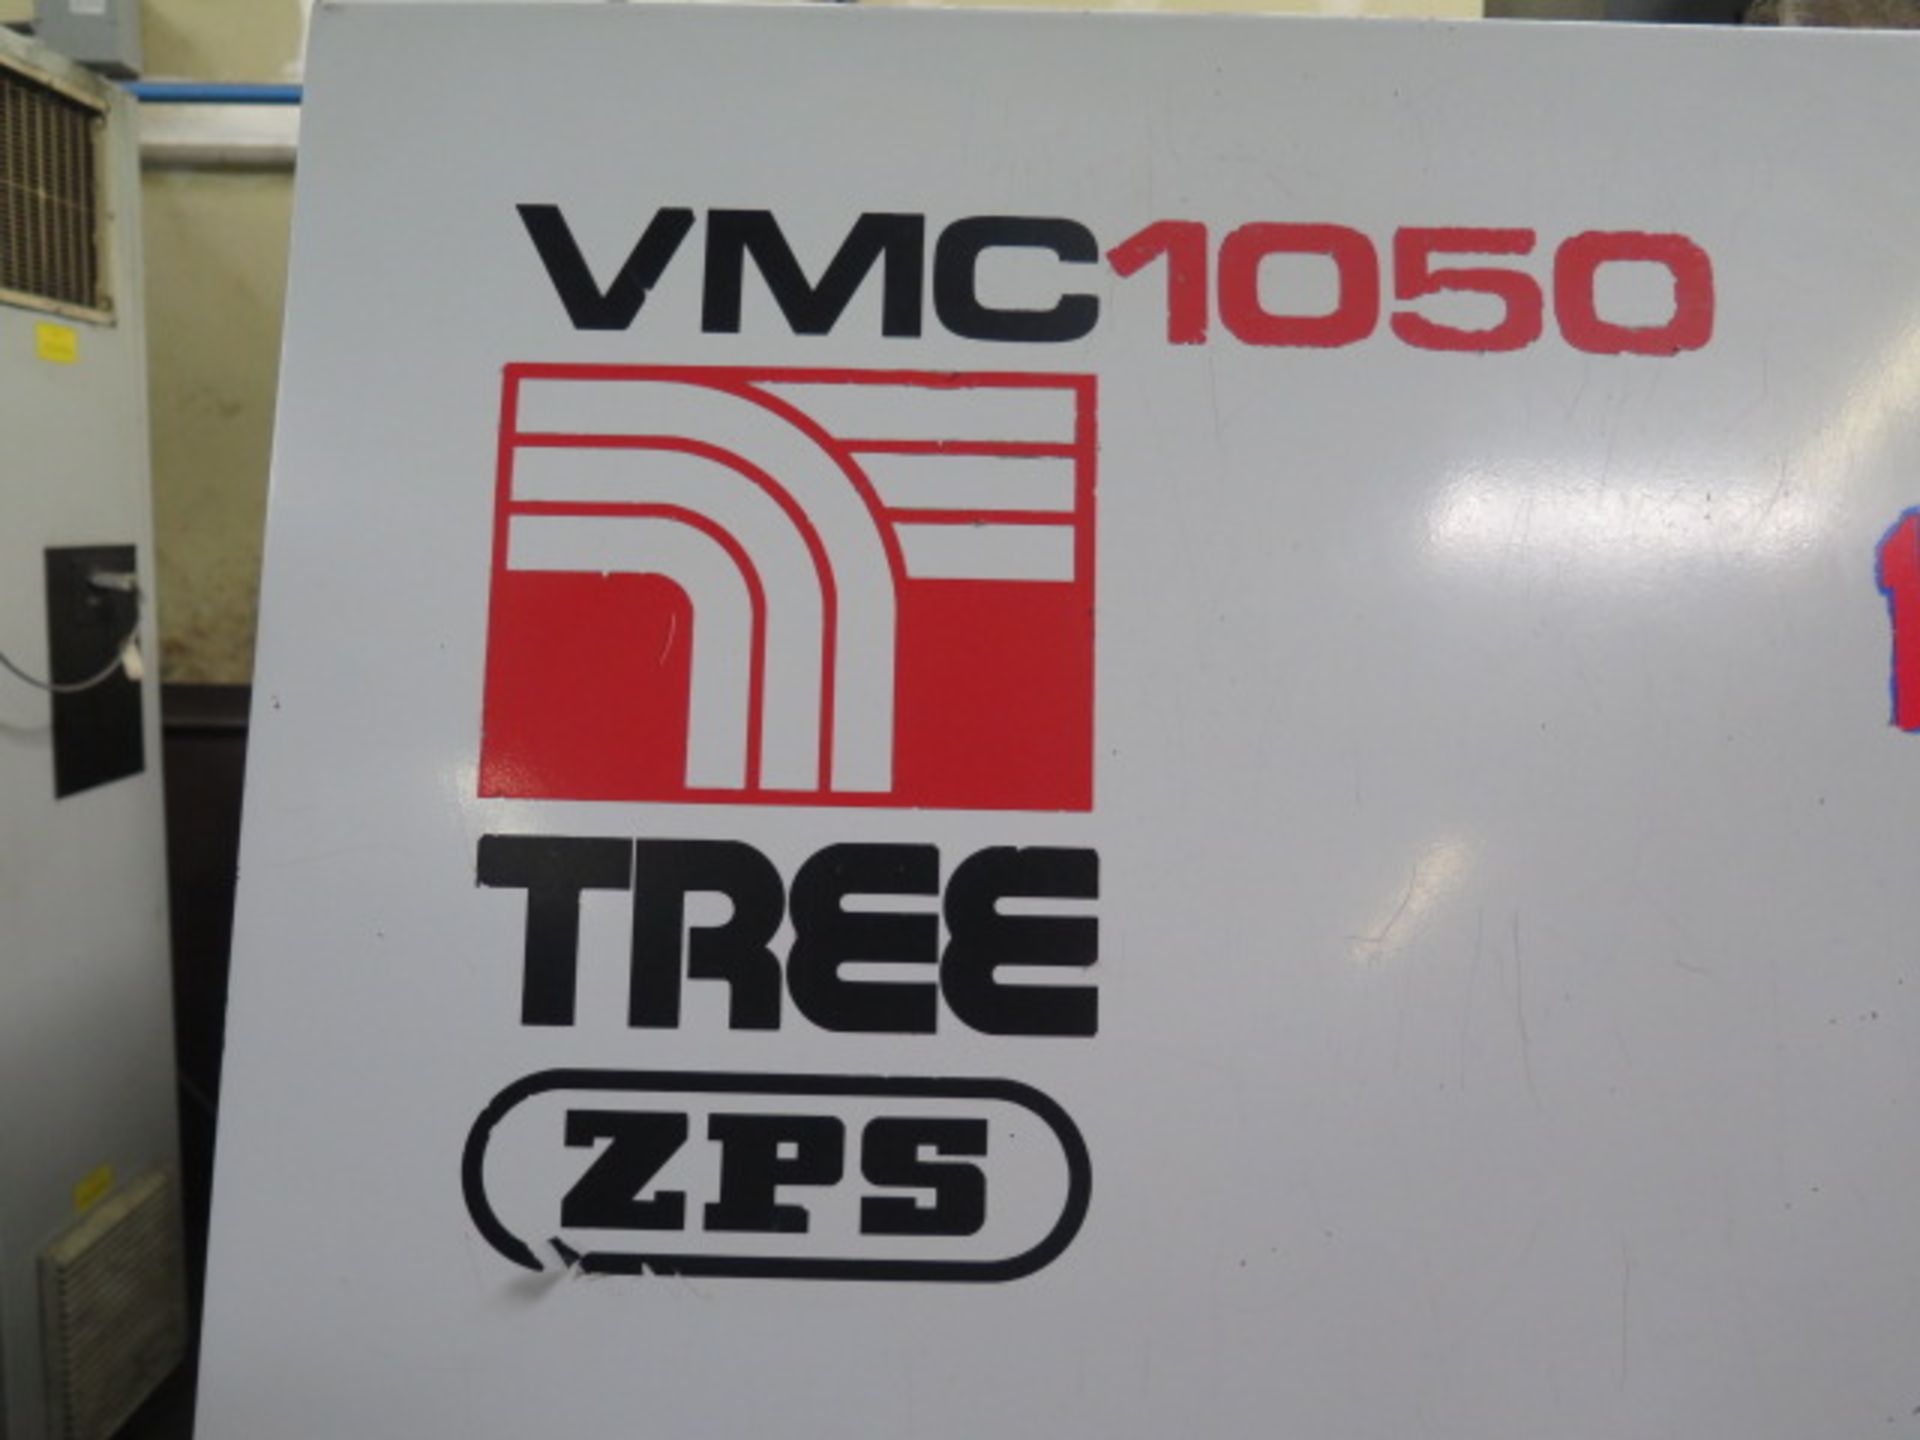 Tree ZPS VMC-1050/24 CNC Vertical Machining Center s/n 9-20-93-1155 w/ Yasnac Controls, 24-Station - Image 10 of 11